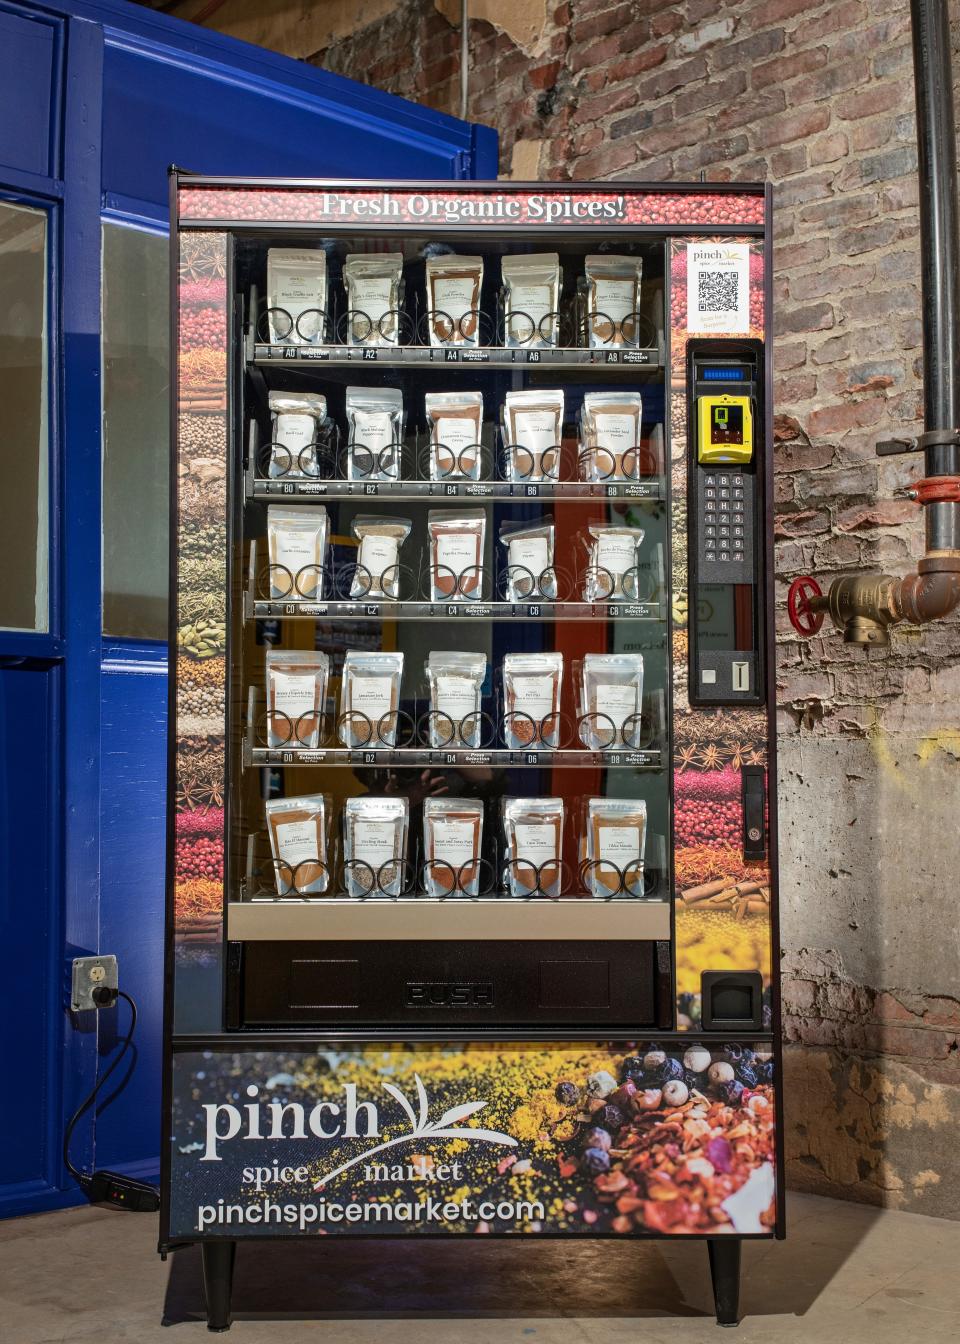 The Pinch Spice Market vending machine at Shippingport Brewing in Louisville's Portland neighborhood.